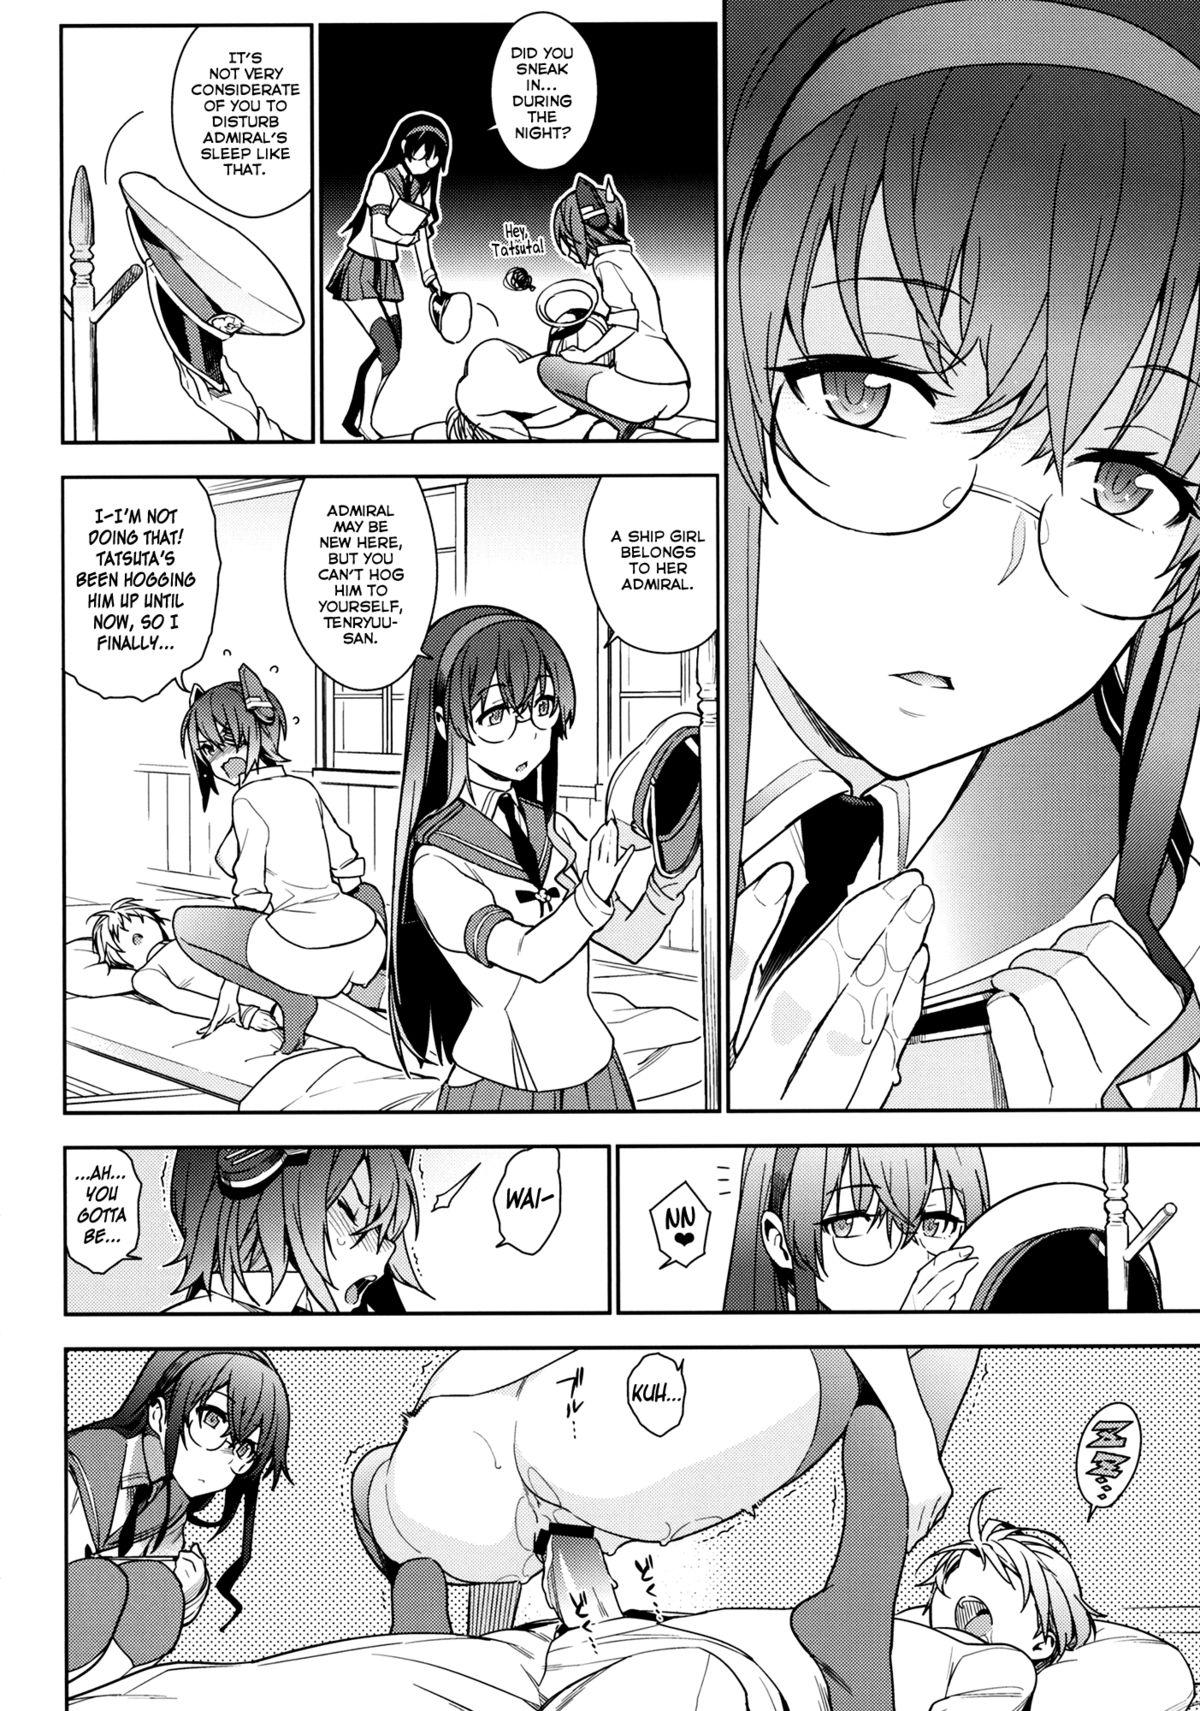 Grande THE LAST ORDER - Kantai collection Teenage Sex - Page 9